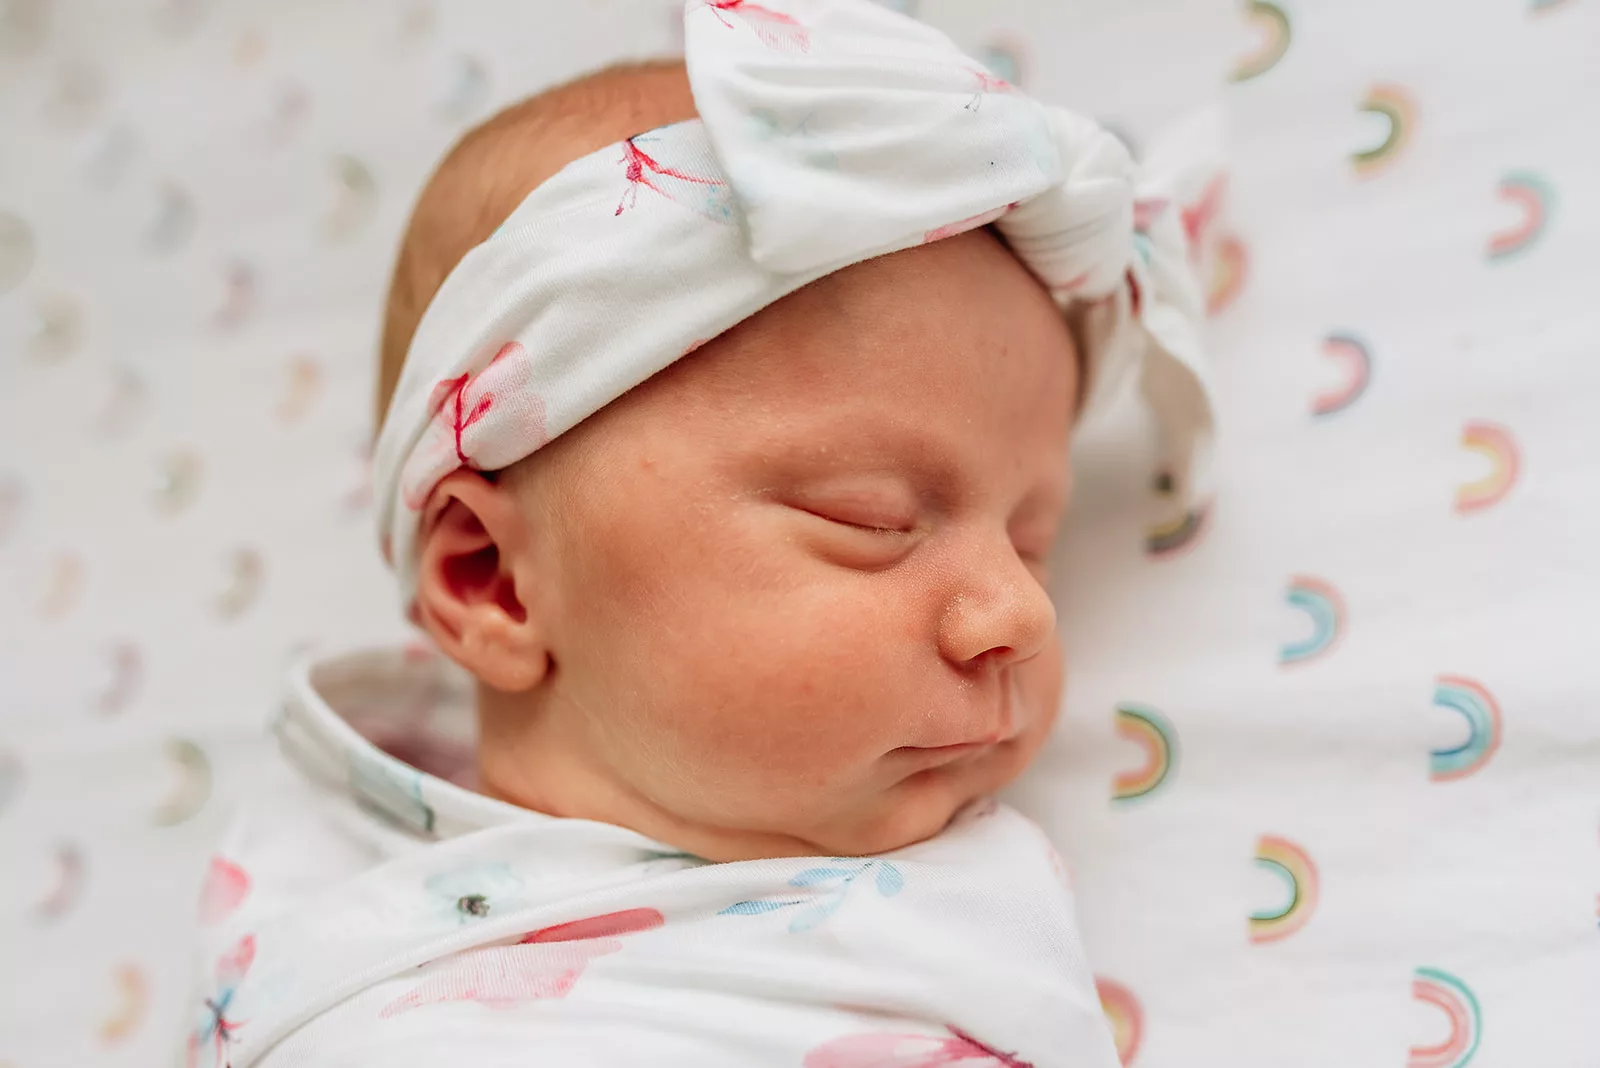 Details of a sleeping newborn baby in a colorful swaddle and bow